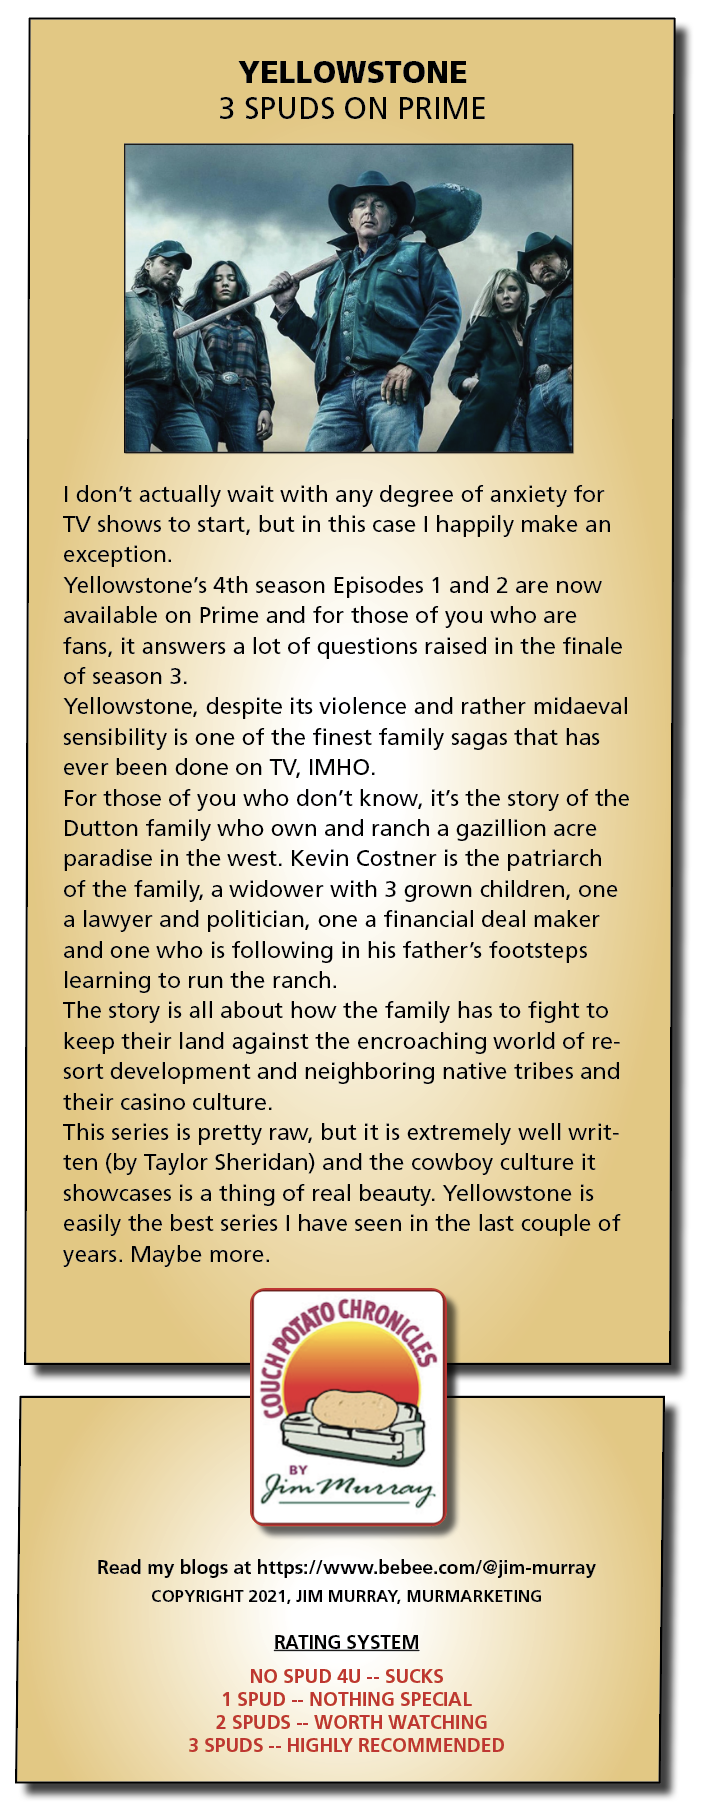 YELLOWSTONE

3 SPUDS ON PRIME

 

I don’t actually wait with any degree of anxiety for
TV shows to start, but in this case | happily make an
exception.

Yellowstone's 4th season Episodes 1 and 2 are now
available on Prime and for those of you who are
fans, it answers a lot of questions raised in the finale
of season 3

Yellowstone, despite its violence and rather midaeval
sensibility is one of the finest family sagas that has
ever been done on TV, IMHO

For those of you who don’t know, it's the story of the
Dutton family who own and ranch a gazillion acre
paradise in the west. Kevin Costner is the patriarch
of the family, a widower with 3 grown children, one
a lawyer and politician, one a financial deal maker
and one who is following in his father’s footsteps
learning to run the ranch

The story is all about how the family has to fight to
keep their land against the encroaching world of re-
sort development and neighboring native tribes and
their casino culture

This series is pretty raw, but it is extremely well writ-
ten (by Taylor Sheridan) and the cowboy culture it
showcases is a thing of real beauty. Yellowstone is
easily the best series | have seen in the last couple of
years. Maybe more.

   

 

Read my blogs at https://www.bebee.com/@jim-murray
COPYRIGHT 2021, JIM MURRAY, MURMARKETING

     
 

RATING SYSTEM

NO SPUD 4U -- SUCKS
1 SPUD -- NOTHING SPECIAL
2 SPUDS -- WORTH WATCHING

3 SPUDS -- HIGHLY RECOMMENDED